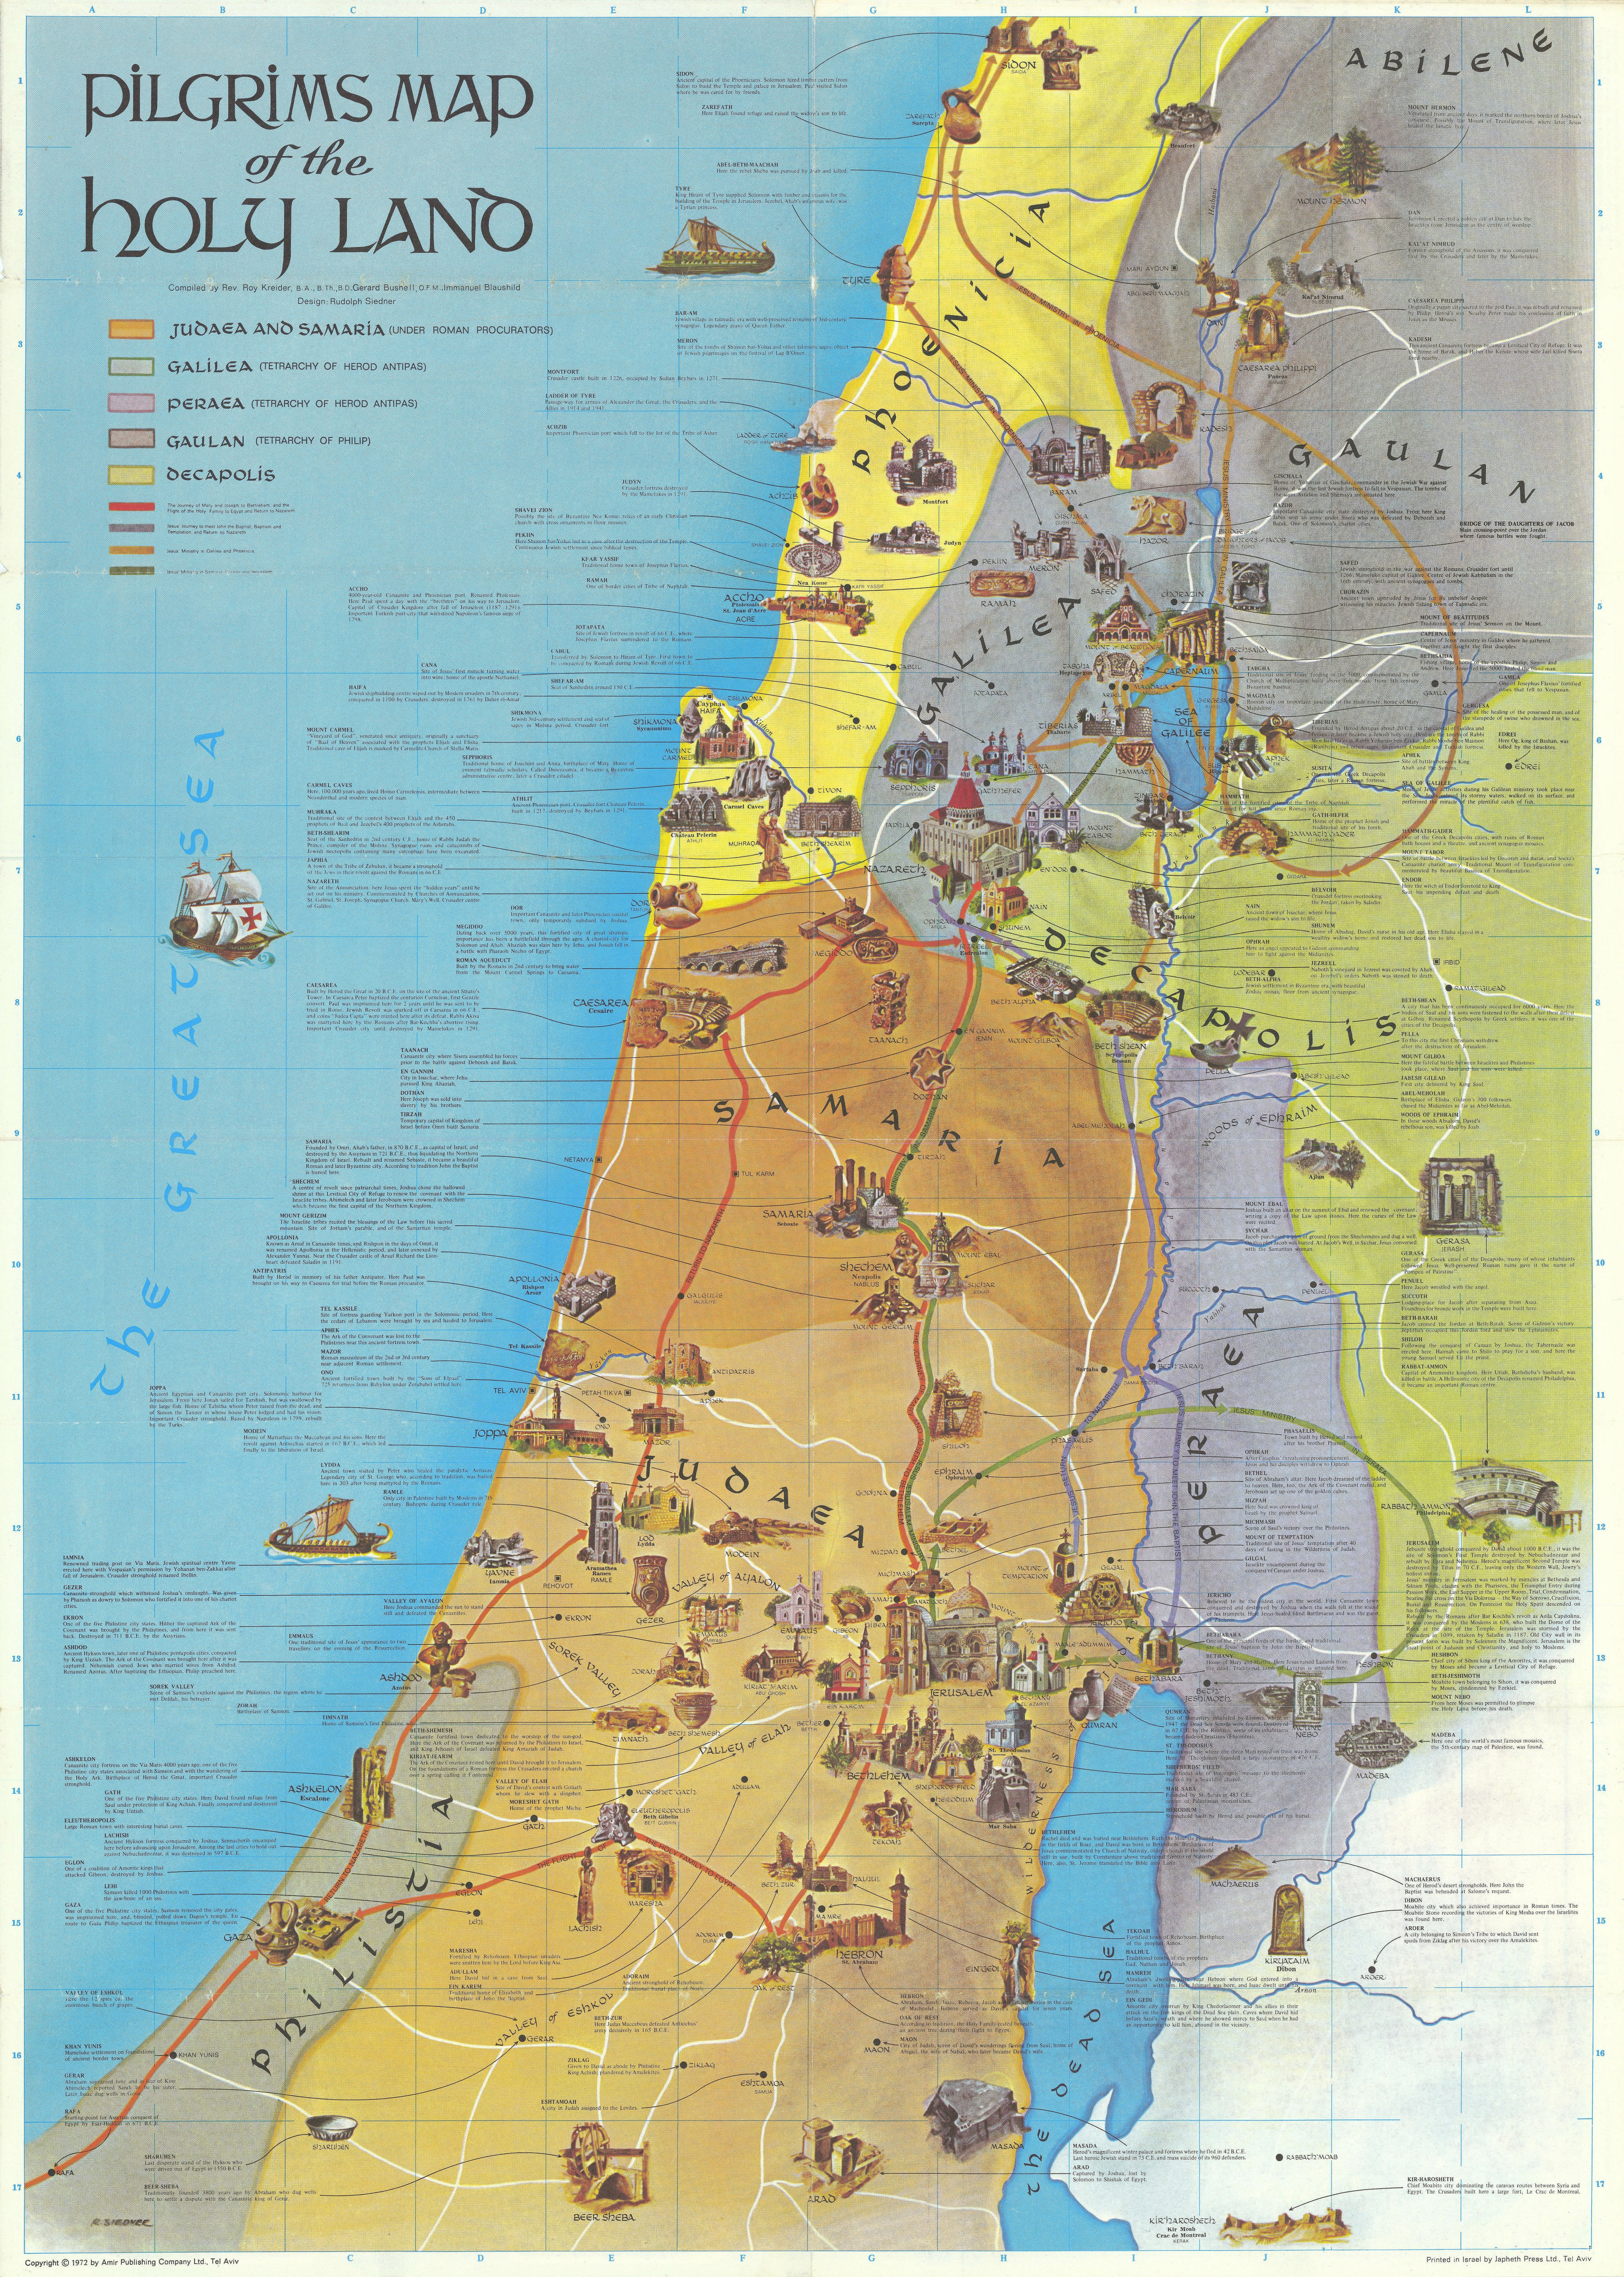 Associate Product Pilgrim's Map of the Holy Land. Pictorial folding Israel map. 85x61cm. AMIR 1972